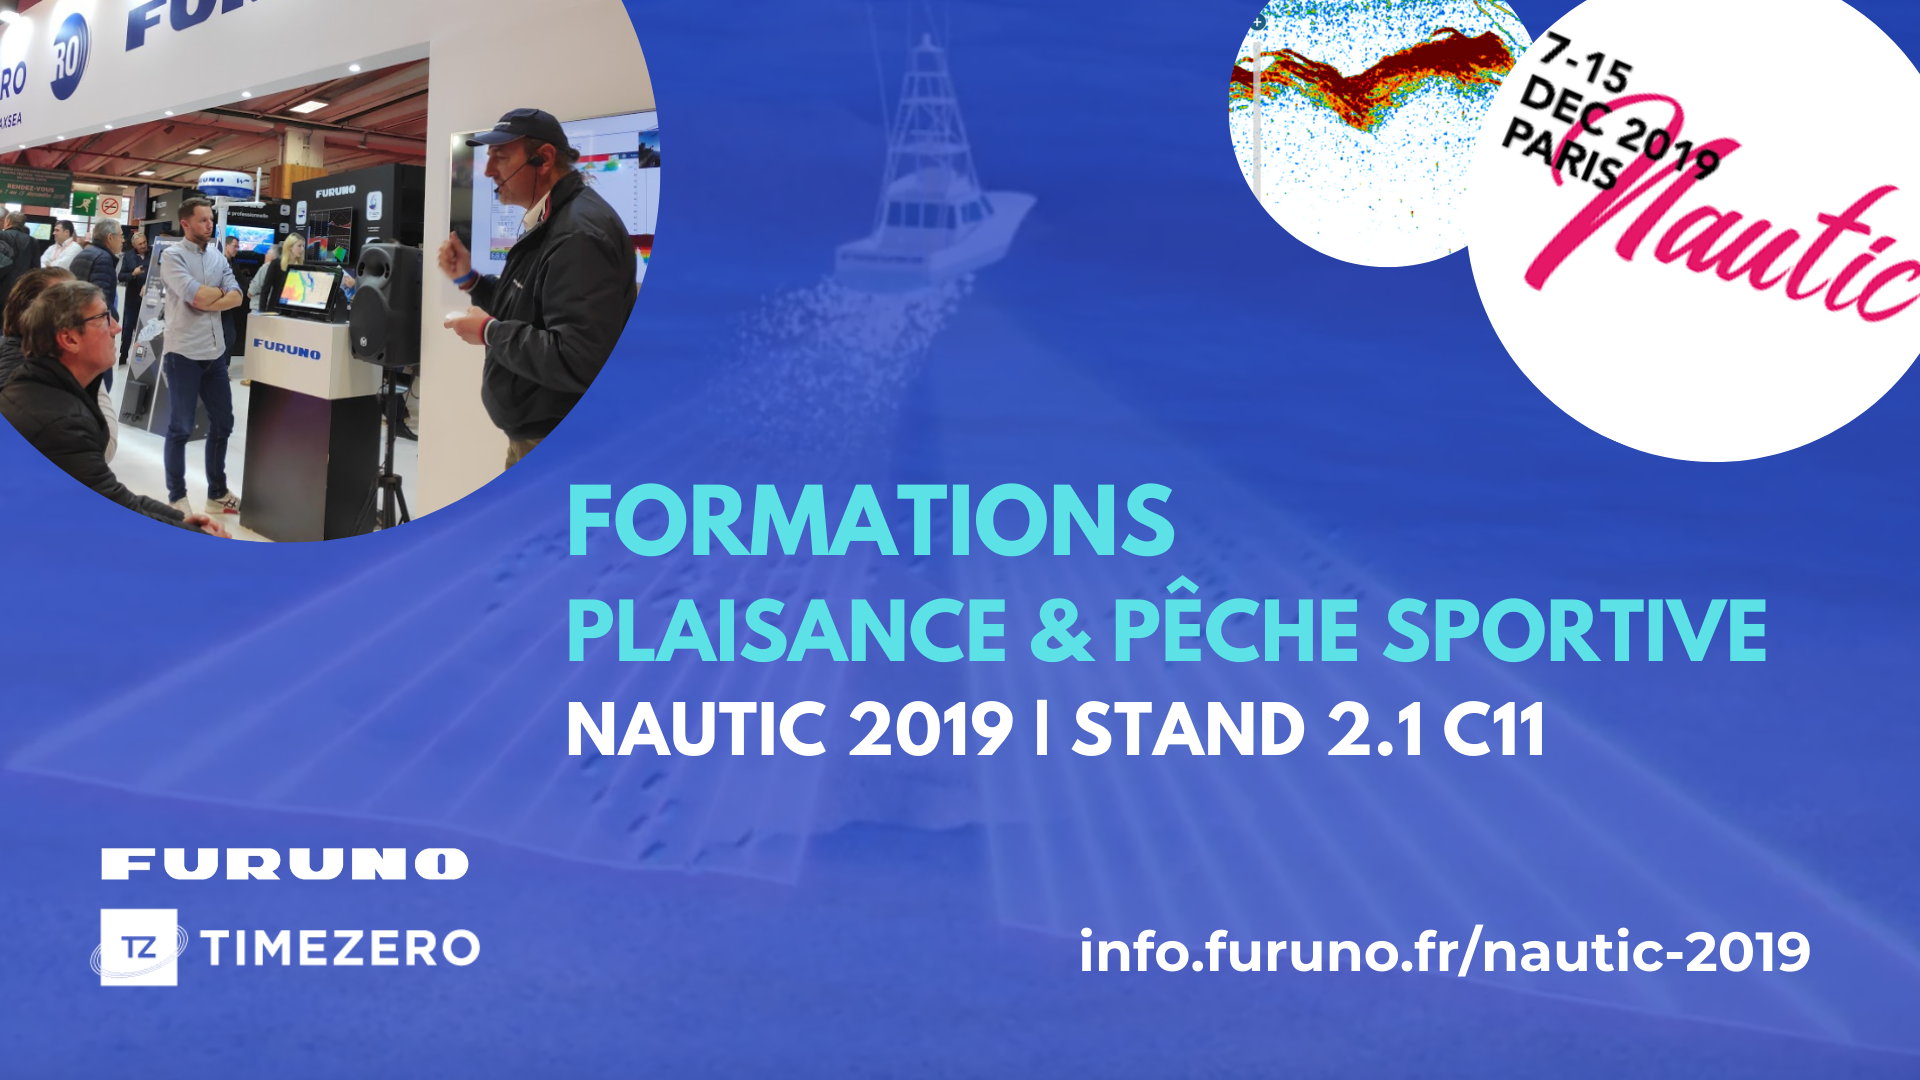 FORMATIONS NAUTIC 2019 - FB EVENT